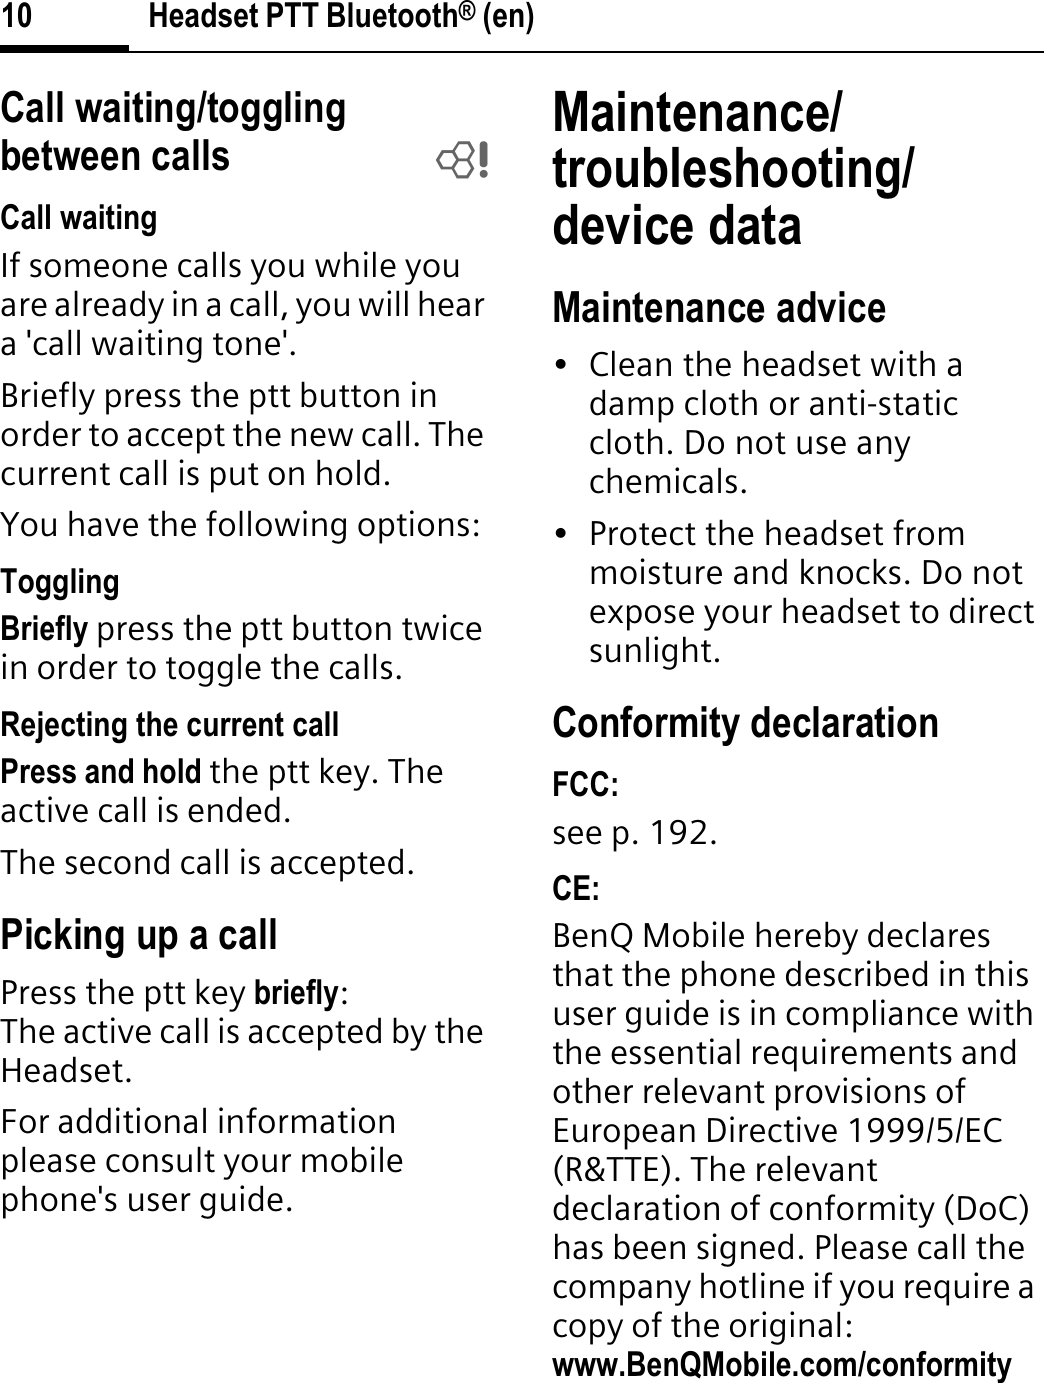 Headset PTT Bluetooth® (en)10Call waiting/toggling between calls bCall waitingIf someone calls you while you are already in a call, you will hear a &apos;call waiting tone&apos;.Briefly press the ptt button in order to accept the new call. The current call is put on hold.You have the following options:TogglingBriefly press the ptt button twice in order to toggle the calls.Rejecting the current callPress and hold the ptt key. The active call is ended. The second call is accepted.Picking up a callPress the ptt key briefly:The active call is accepted by the Headset.For additional information please consult your mobile phone&apos;s user guide.Maintenance/troubleshooting/device dataMaintenance advice• Clean the headset with a damp cloth or anti-static cloth. Do not use any chemicals.• Protect the headset from moisture and knocks. Do not expose your headset to direct sunlight.Conformity declarationFCC:see p. 192.CE:BenQ Mobile hereby declares that the phone described in this user guide is in compliance with the essential requirements and other relevant provisions of European Directive 1999/5/EC (R&amp;TTE). The relevant declaration of conformity (DoC) has been signed. Please call the company hotline if you require a copy of the original:www.BenQMobile.com/conformity 